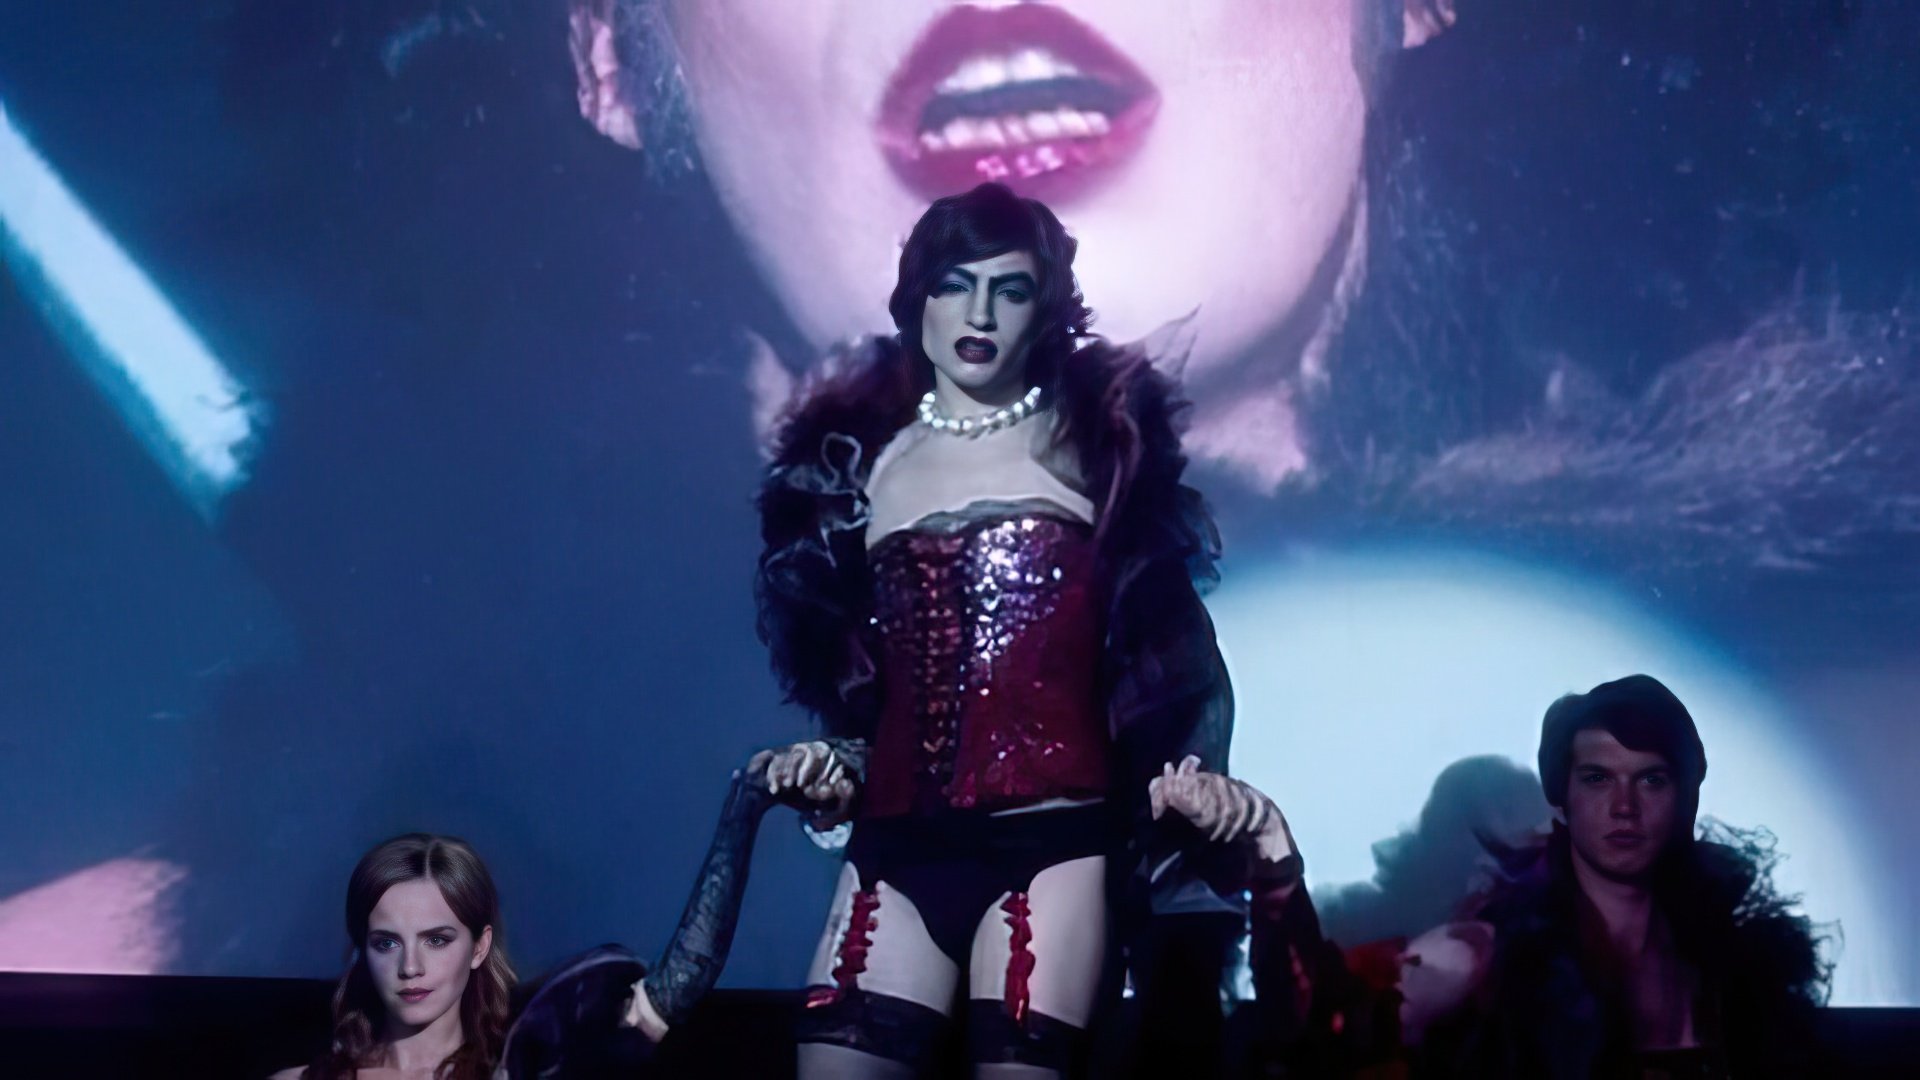 For his transvestite dance Ezra Miller was nominated for the MTV Movie Awards